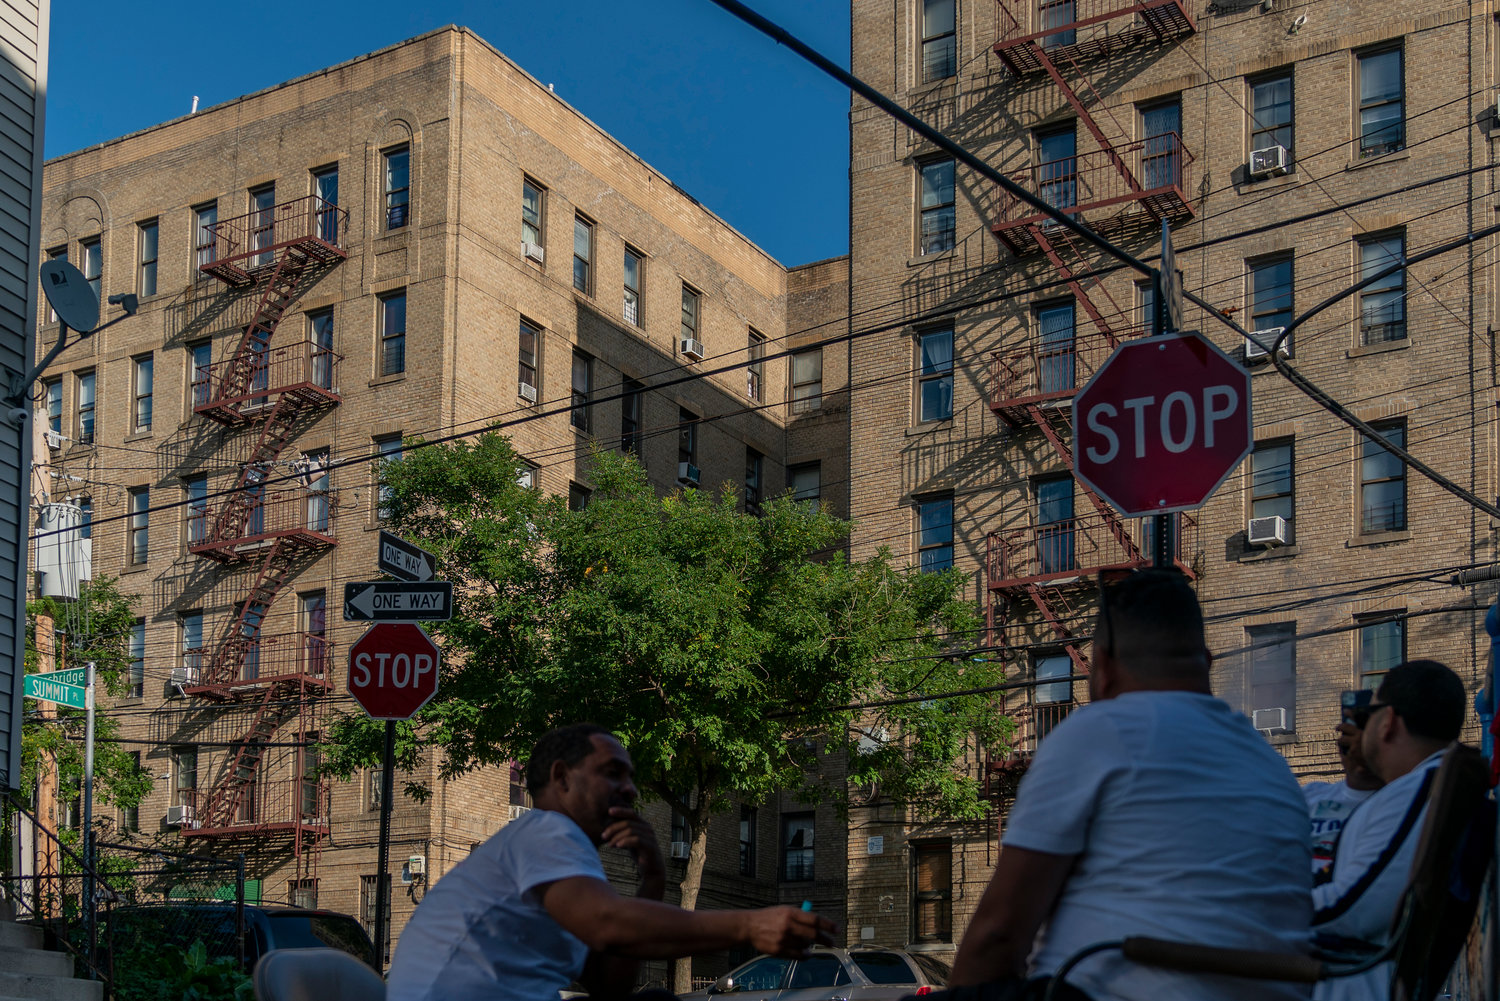 Hundreds of people are evicted across the city each year, including four over the last two years at 3110 Kingsbridge Terrace, according to city data. There’s no information about why these evictions happened, but it’s unlikely that anyone else will be evicted this year as eviction moratoriums continue to be extended.